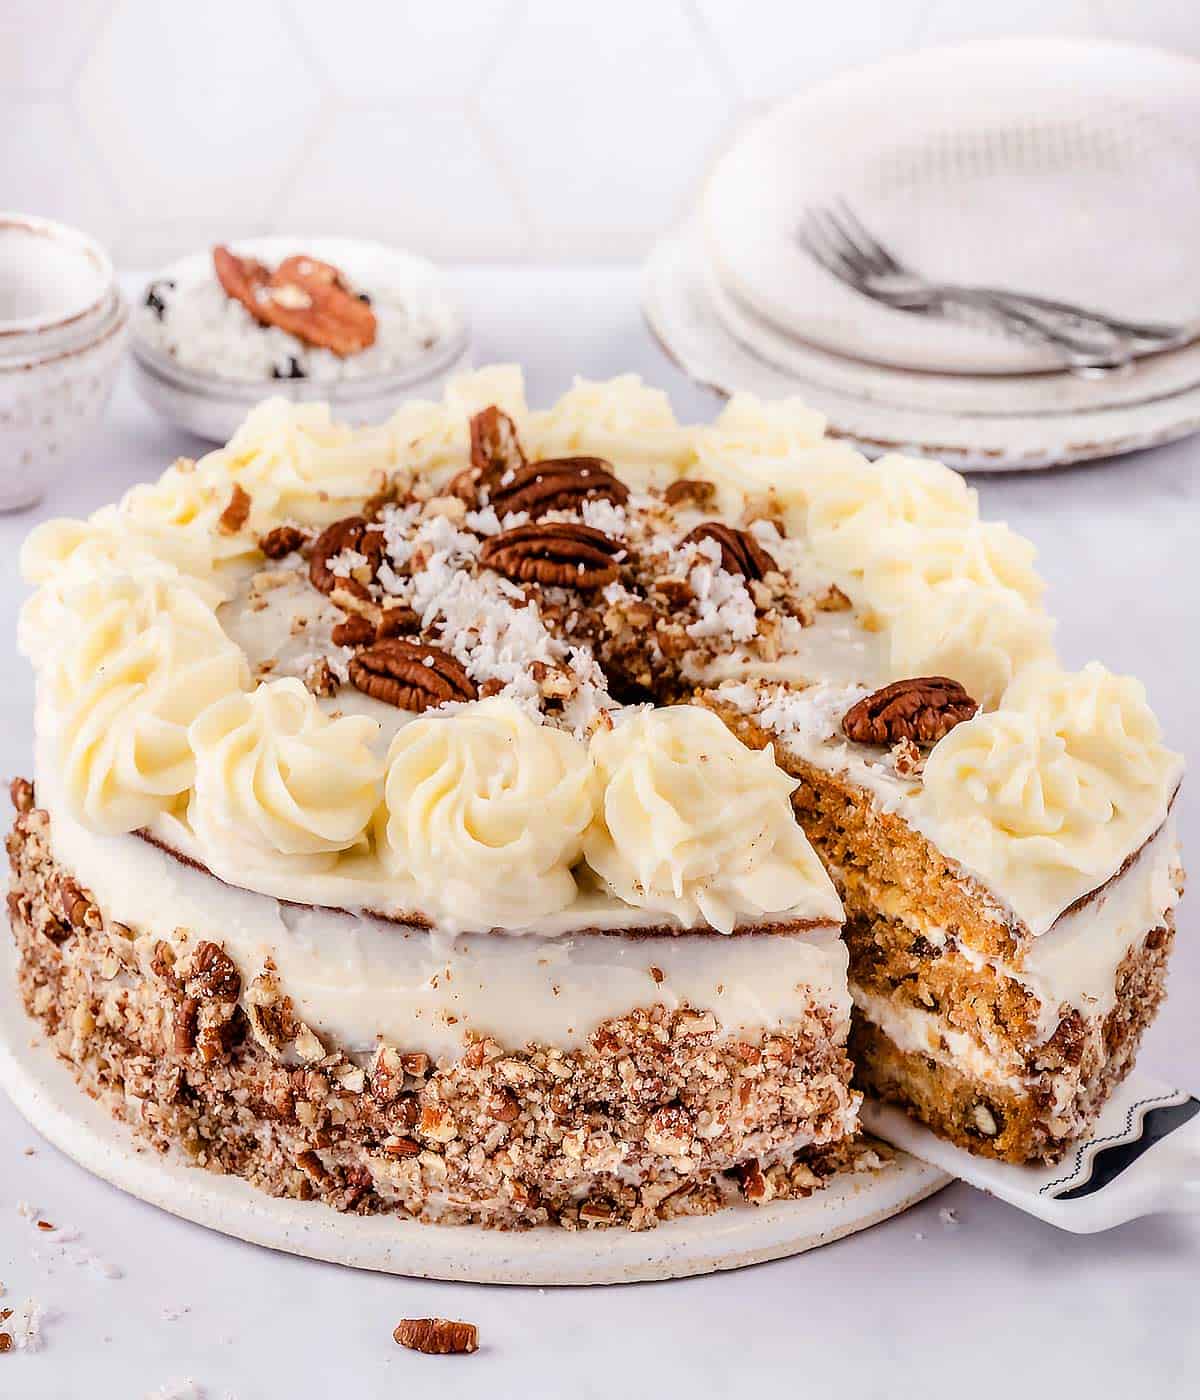 Carrot cake with cream cheese frosting on a board.